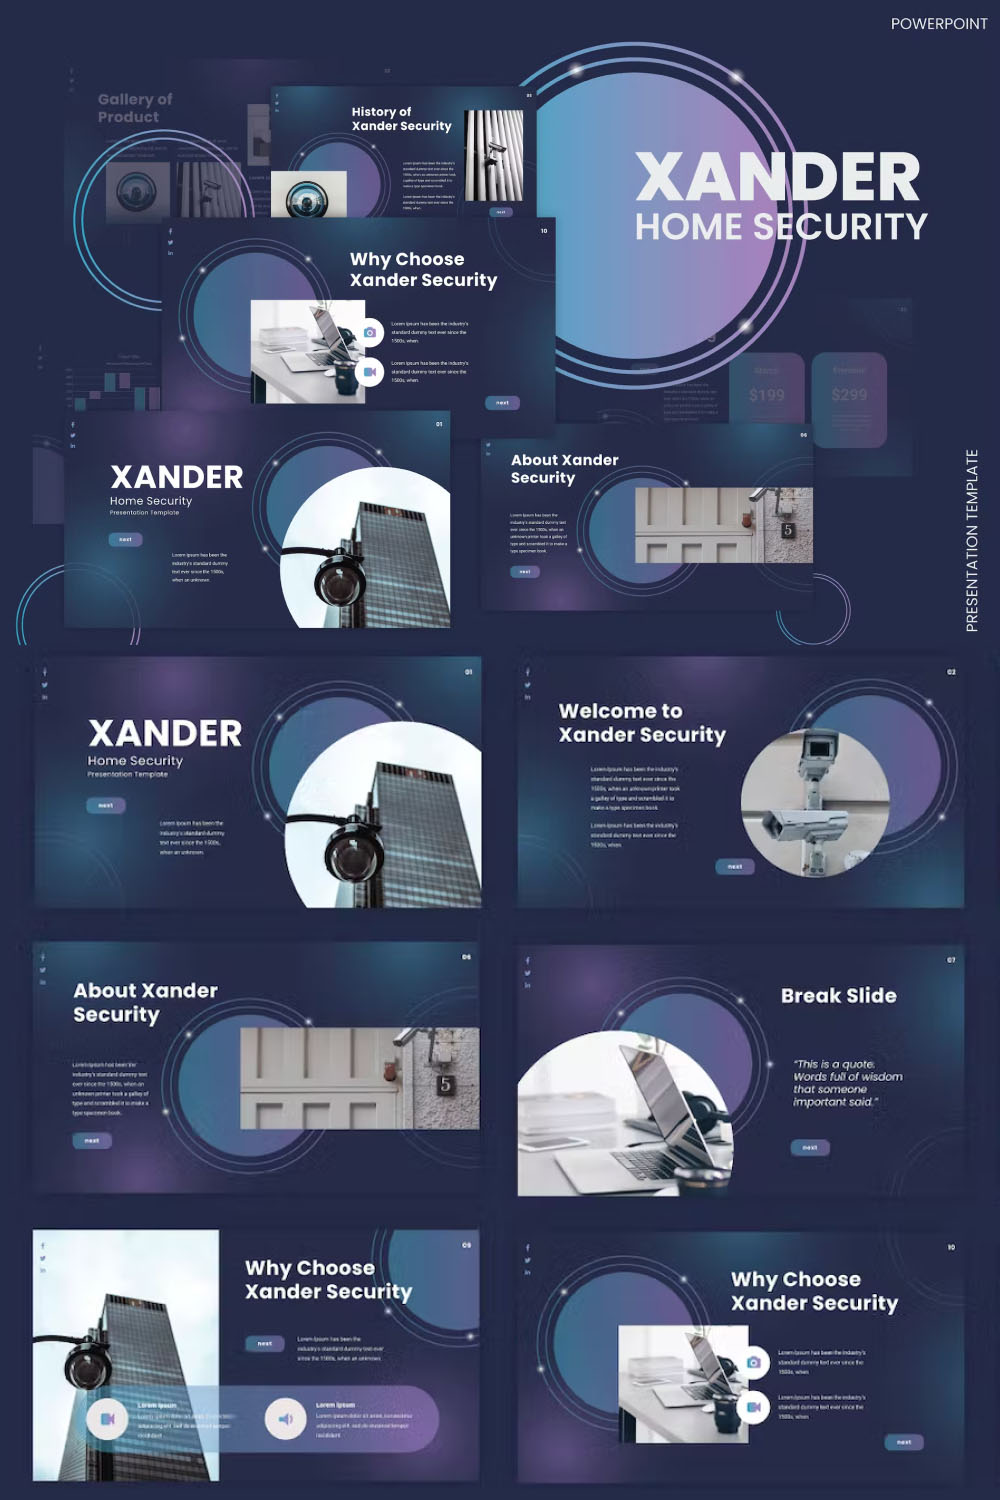 Xander home security powerpoint template of pinterest.